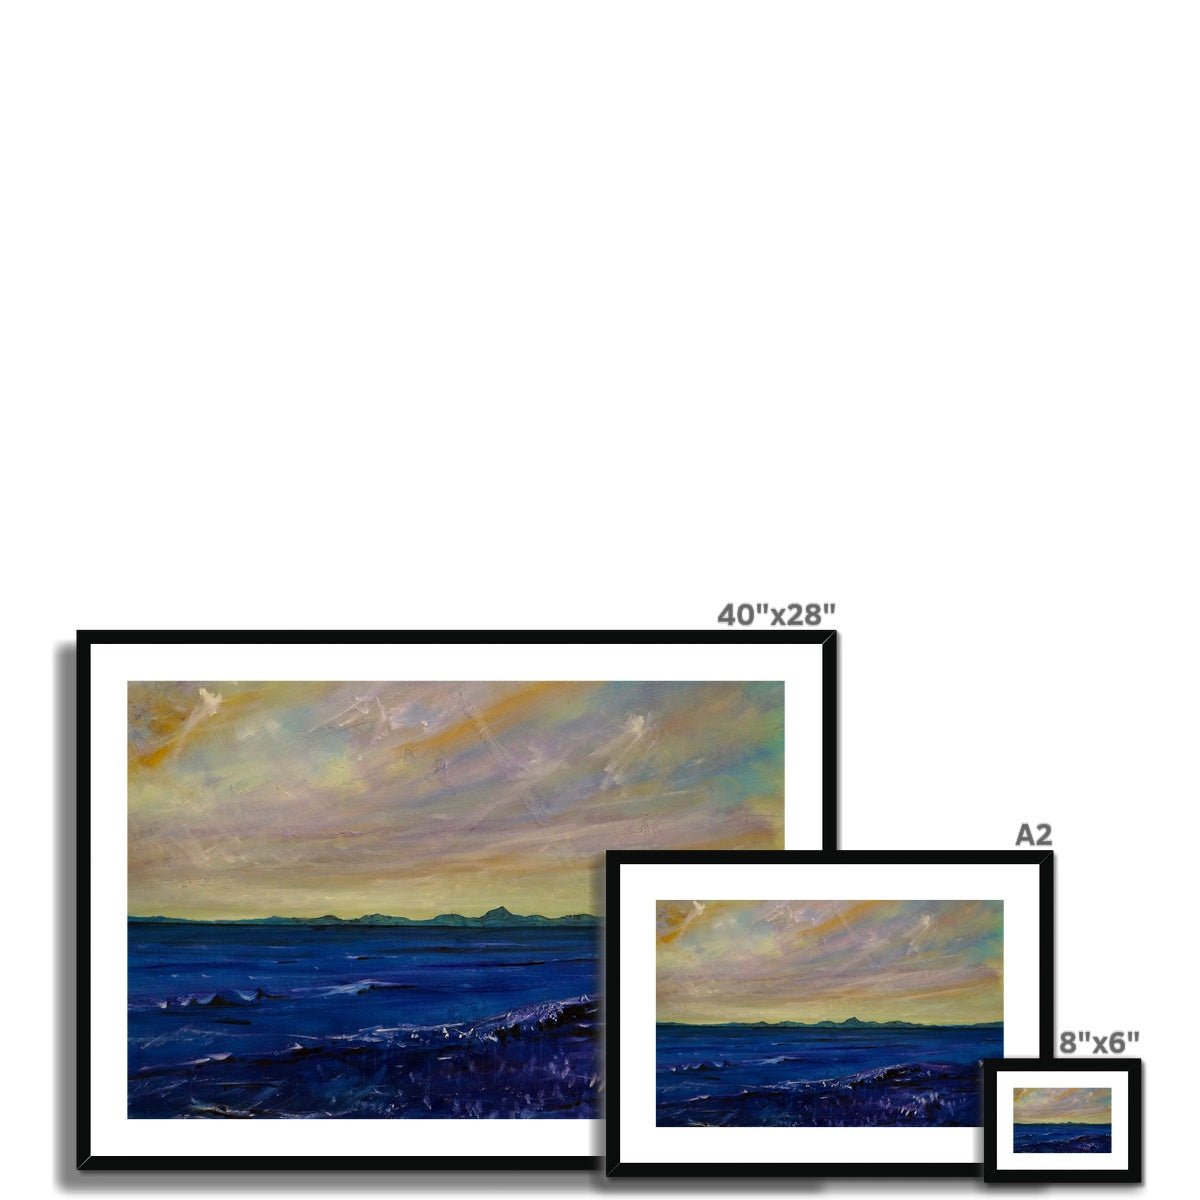 Jura Painting | Framed & Mounted Prints From Scotland-Framed & Mounted Prints-Hebridean Islands Art Gallery-Paintings, Prints, Homeware, Art Gifts From Scotland By Scottish Artist Kevin Hunter